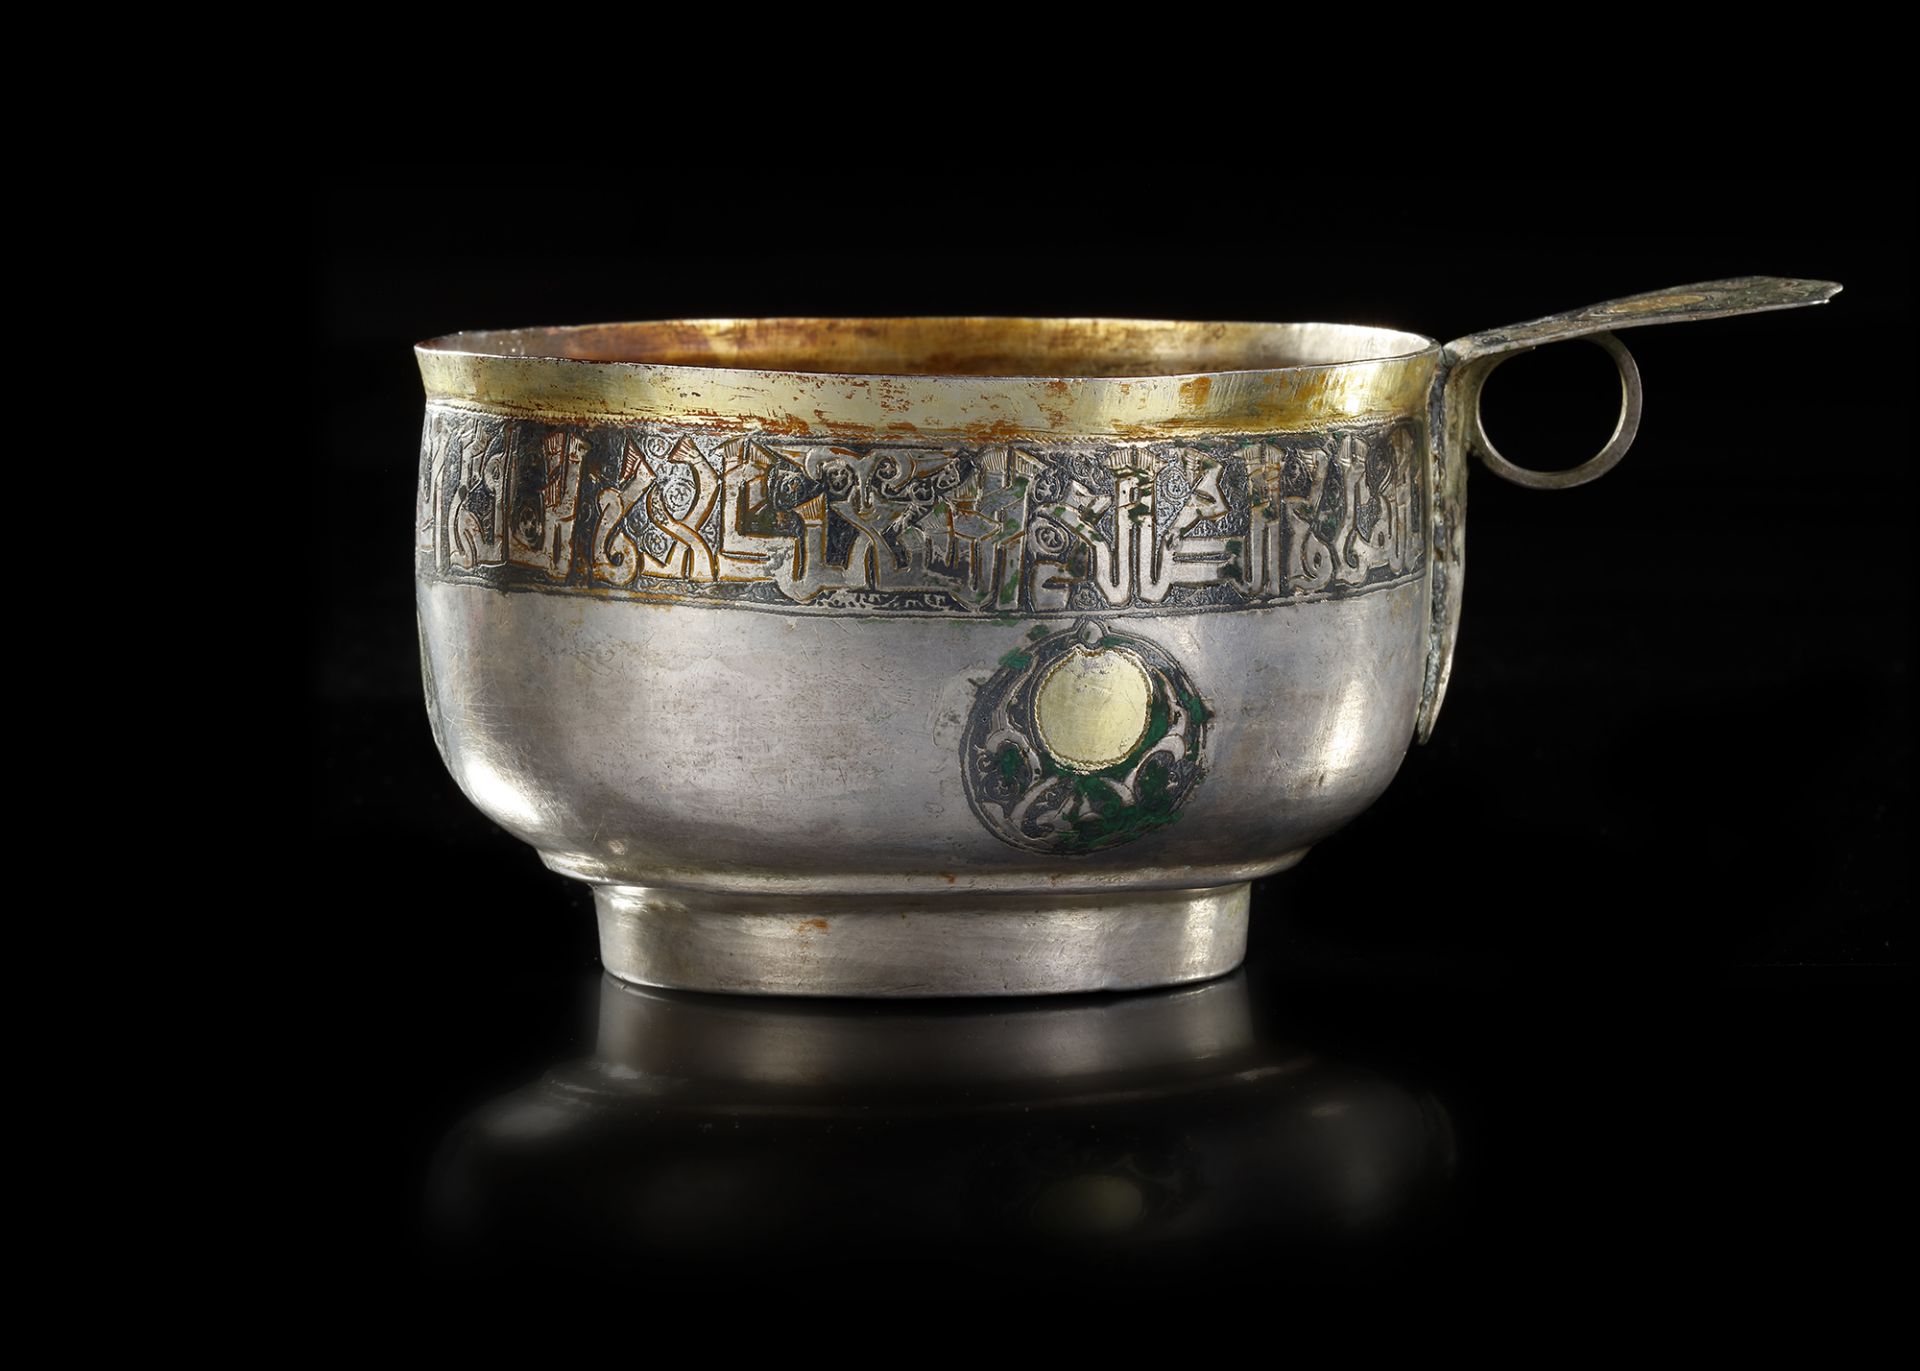 A RARE SILVER AND NIELLOED CUP WITH KUFIC INSCRIPTION, PERSIA OR CENTRAL ASIA, 11TH-12TH CENTURY - Image 9 of 34